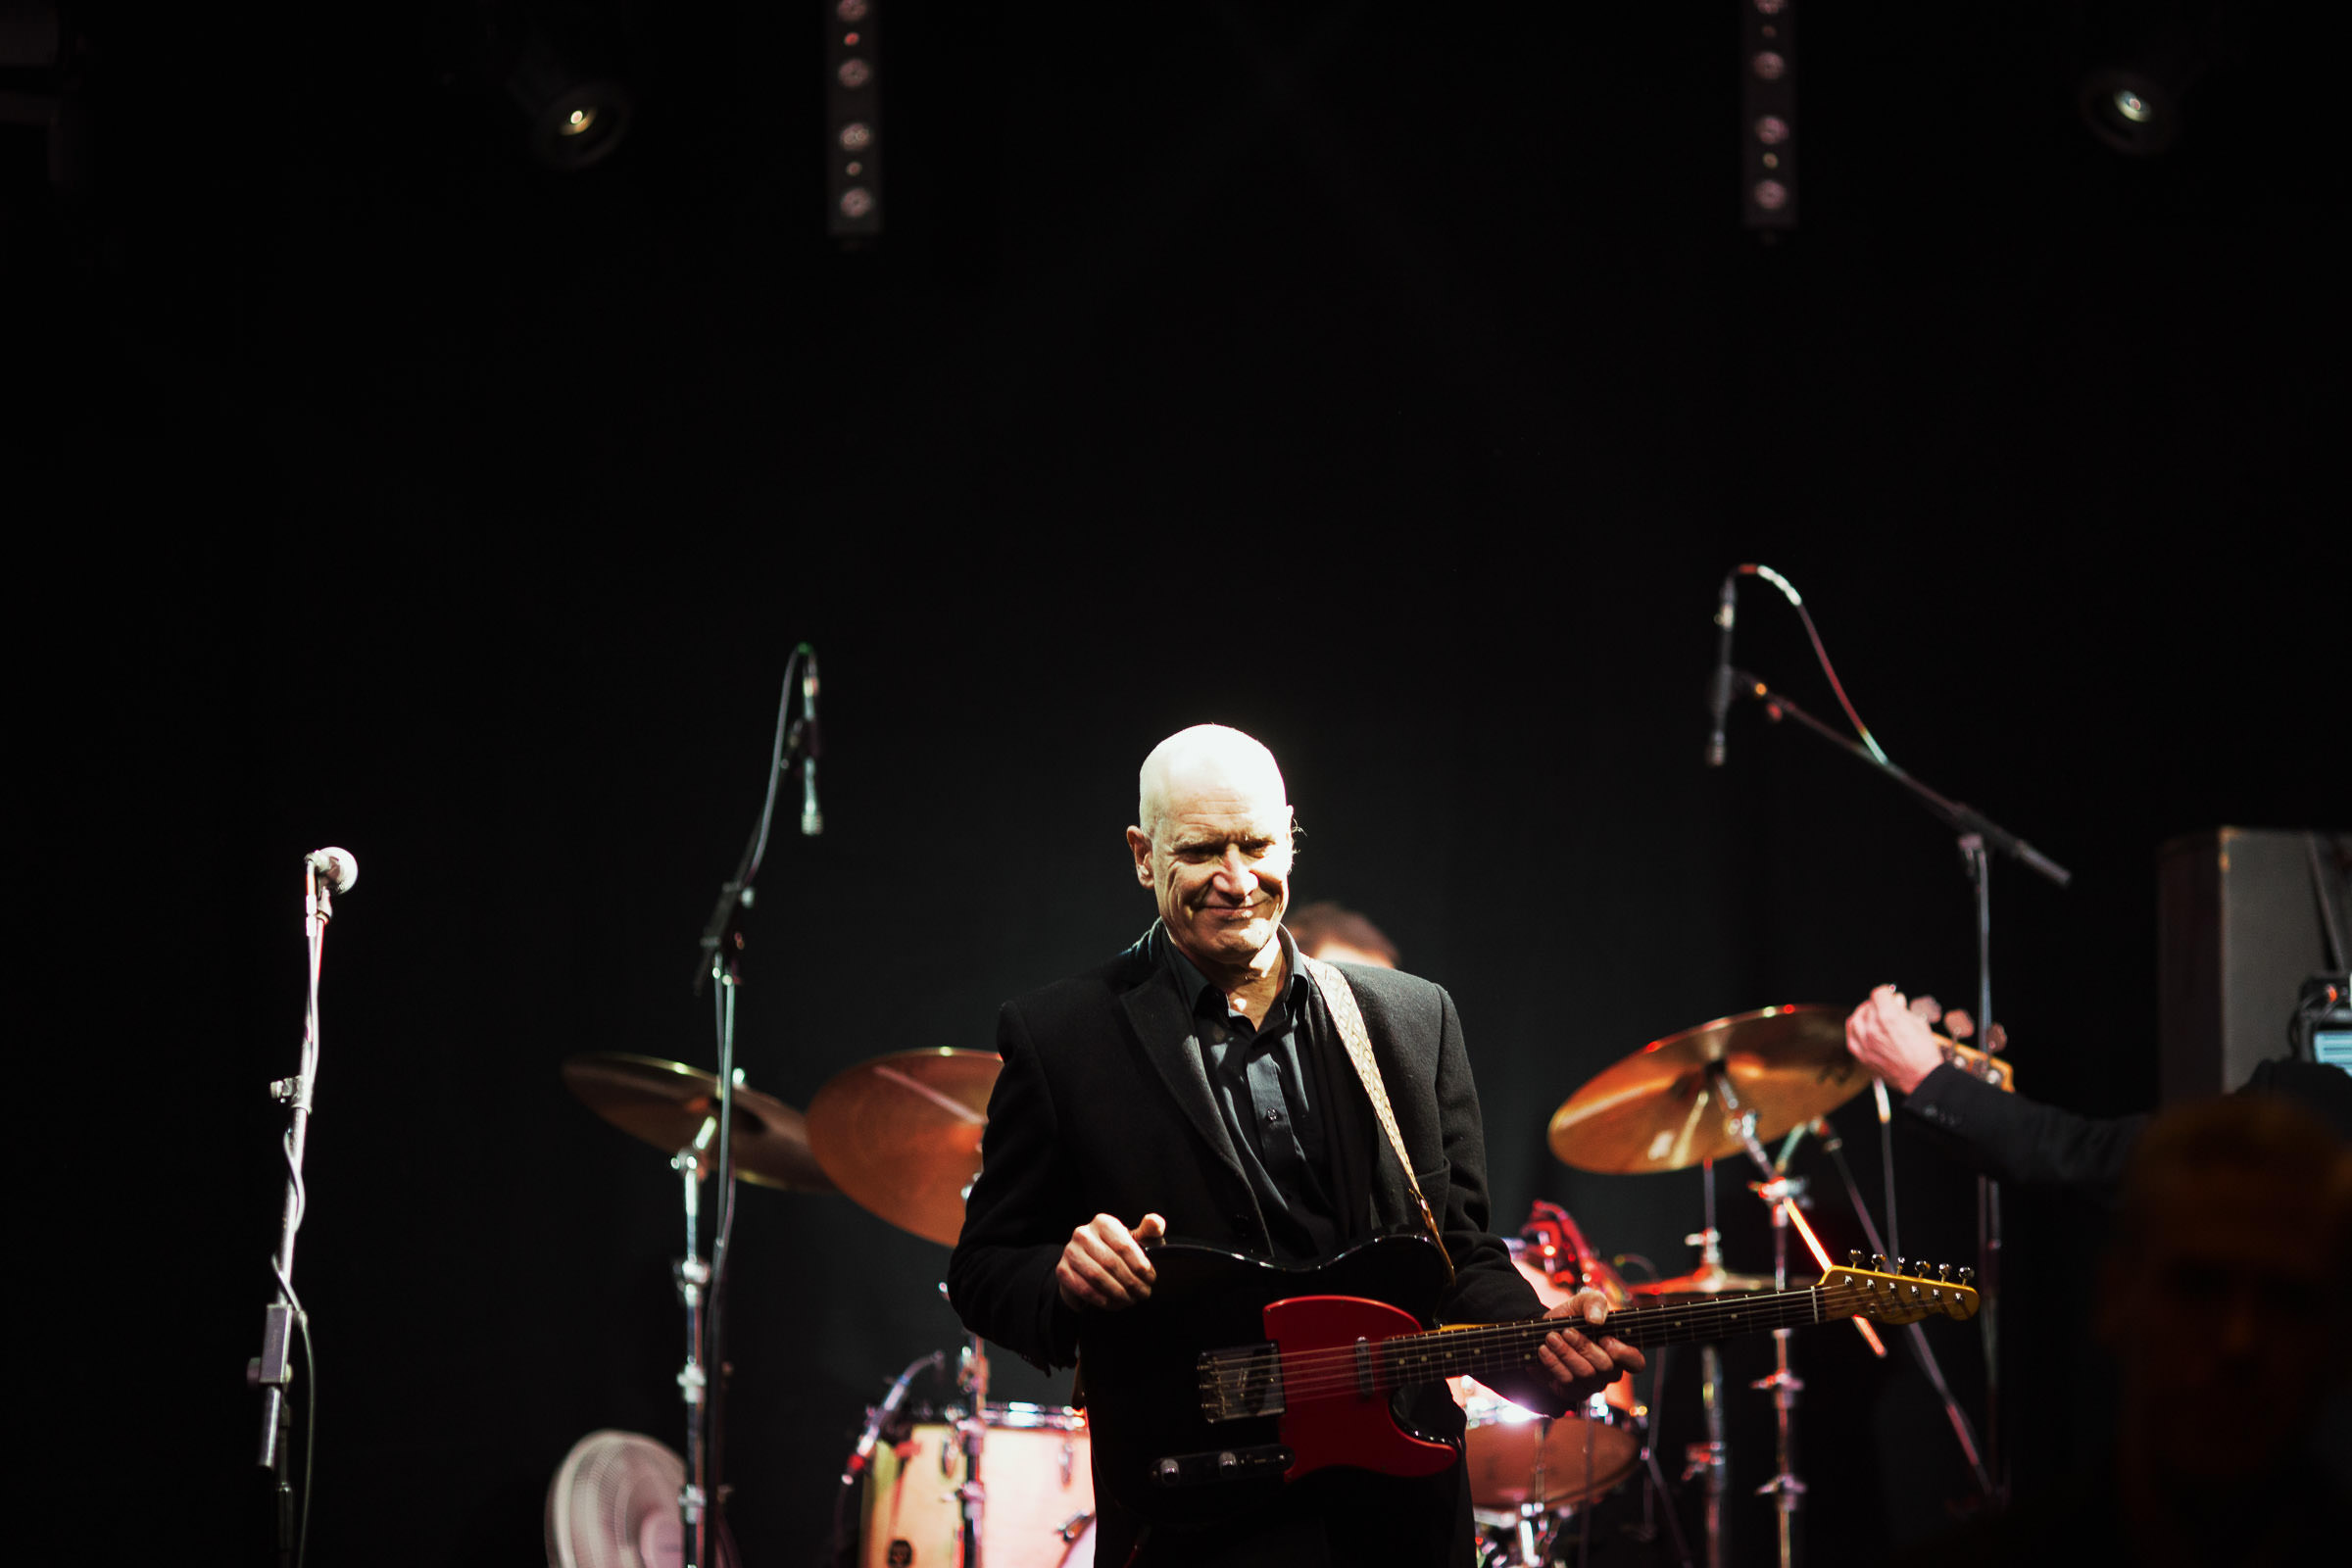 Wilko Johnson smiling during a soundcheck at the Cambridge Junction